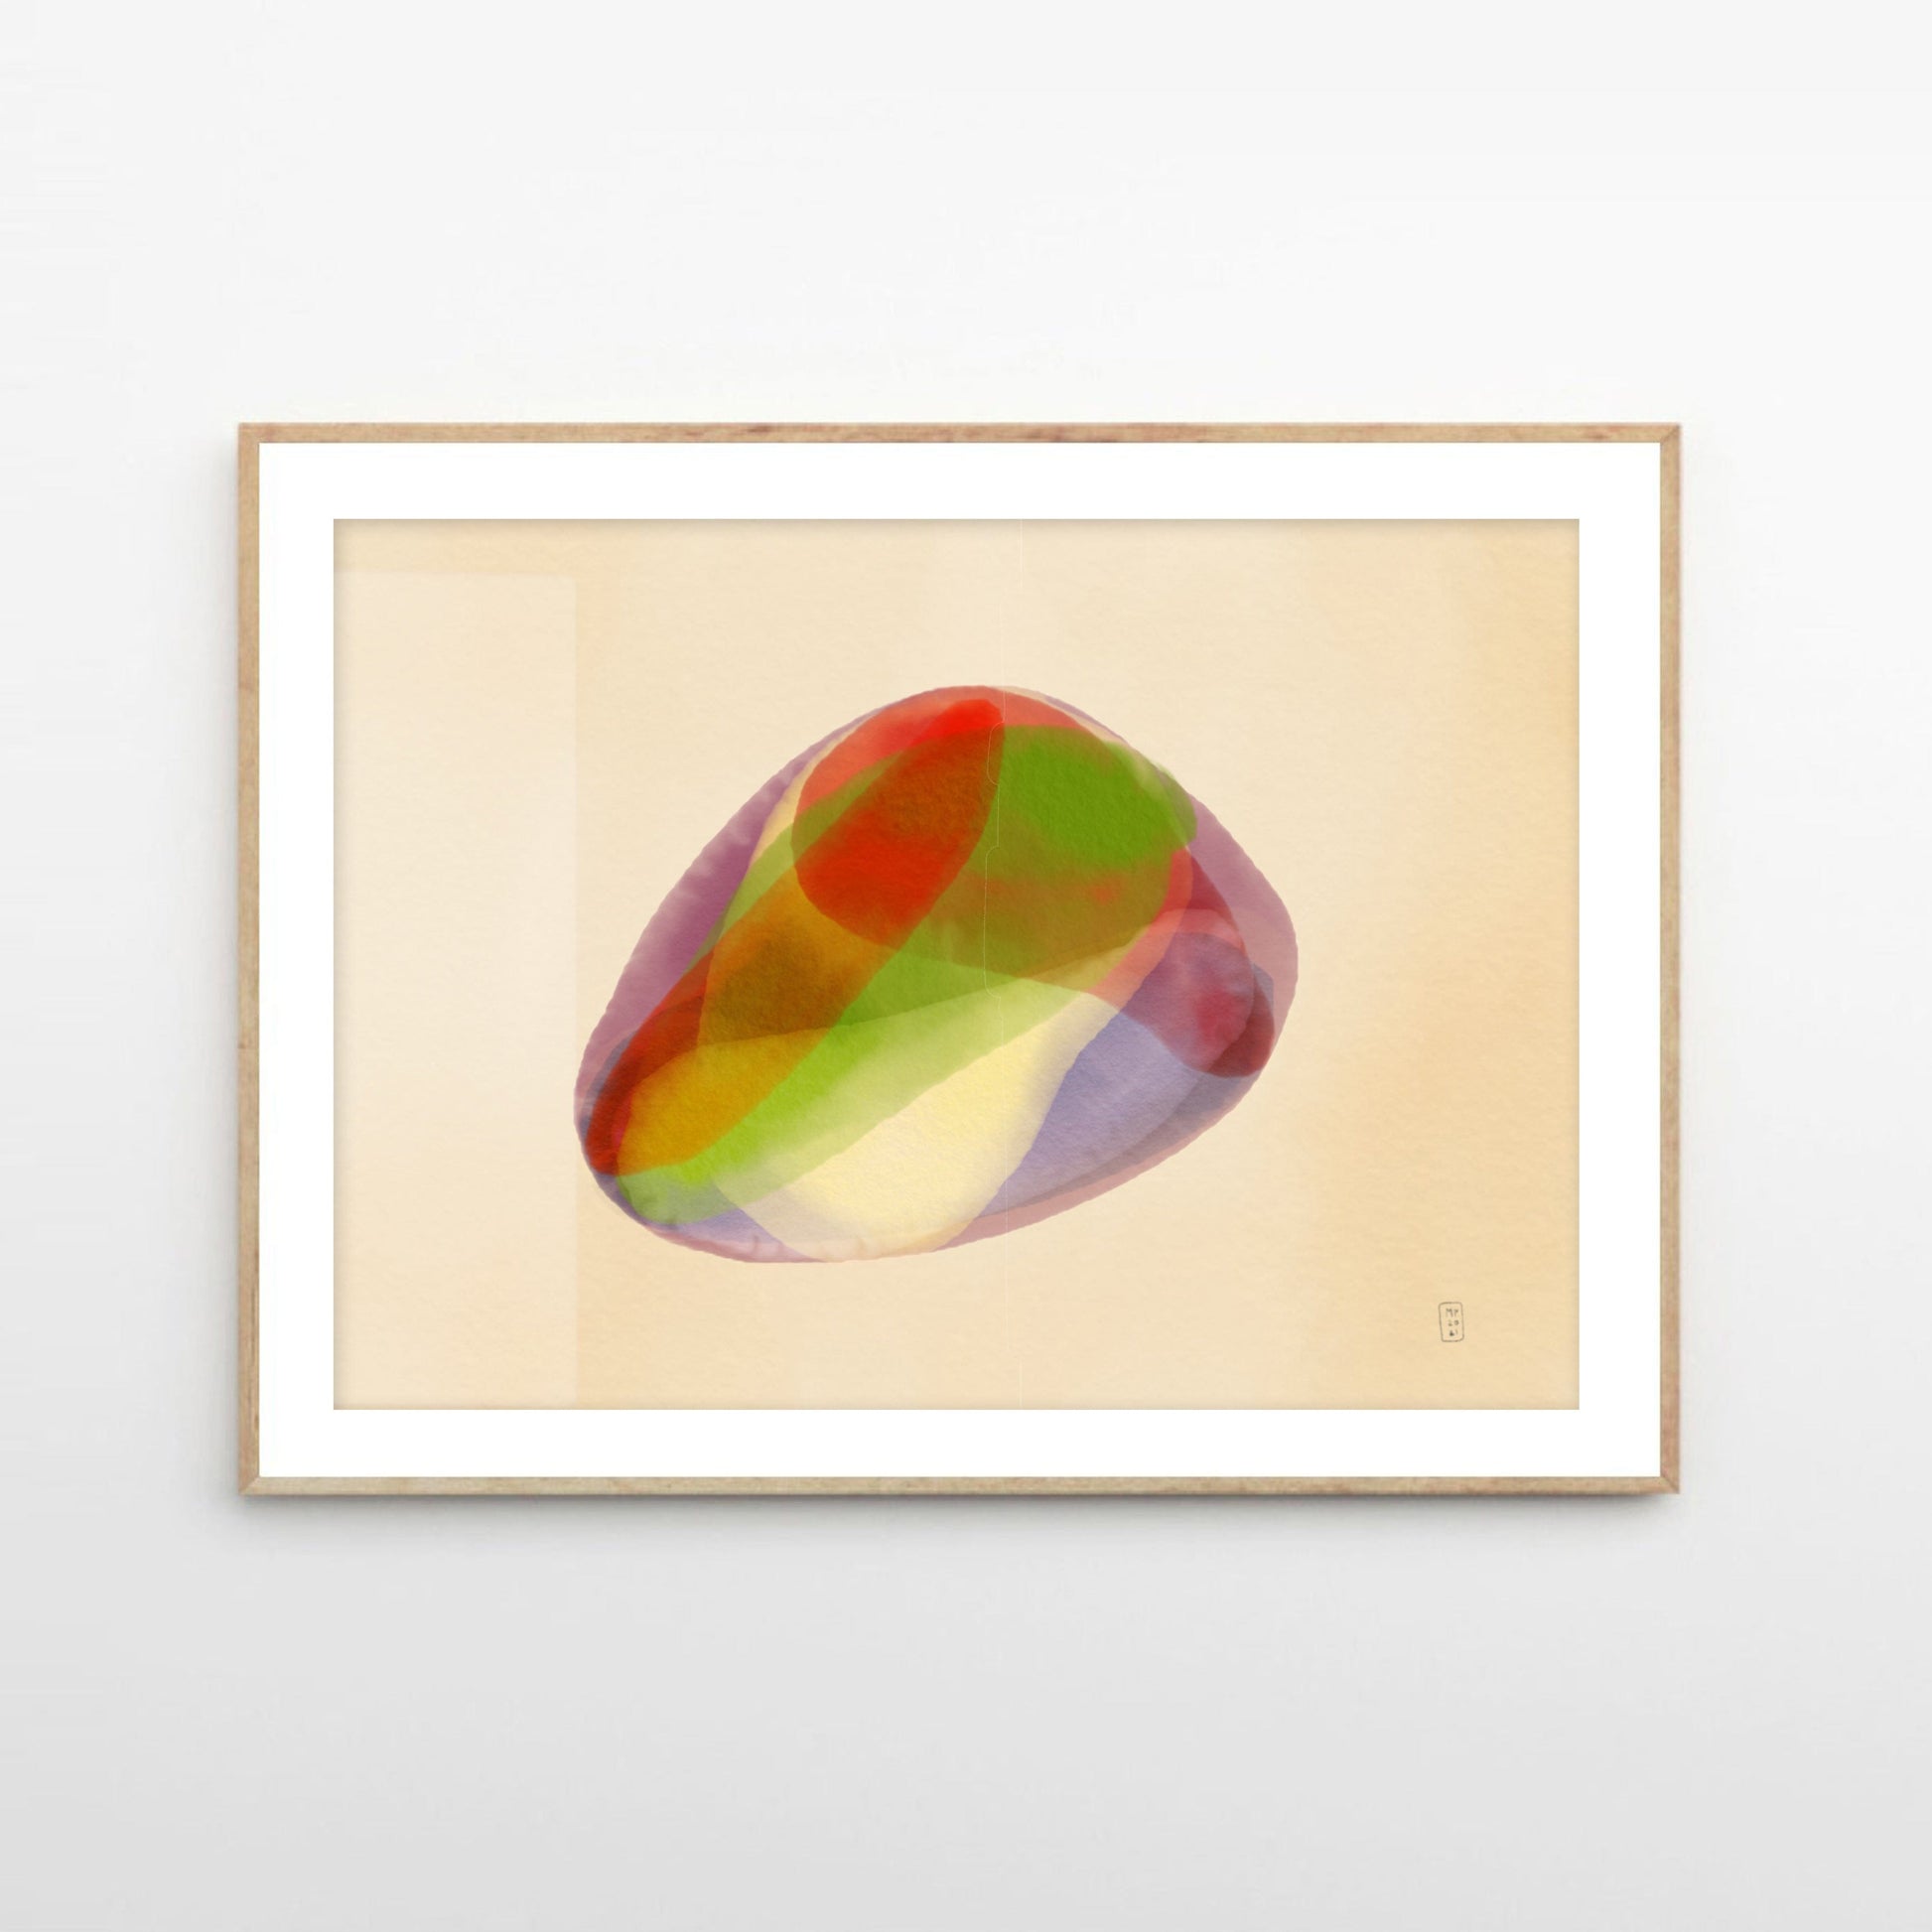 Egg shaped abstract composition in watercolours, available in C-Type print on Fuji Matt Crystal archive paper with a semi-matt finish. - Starting from 19 € / Shipped Worldwide